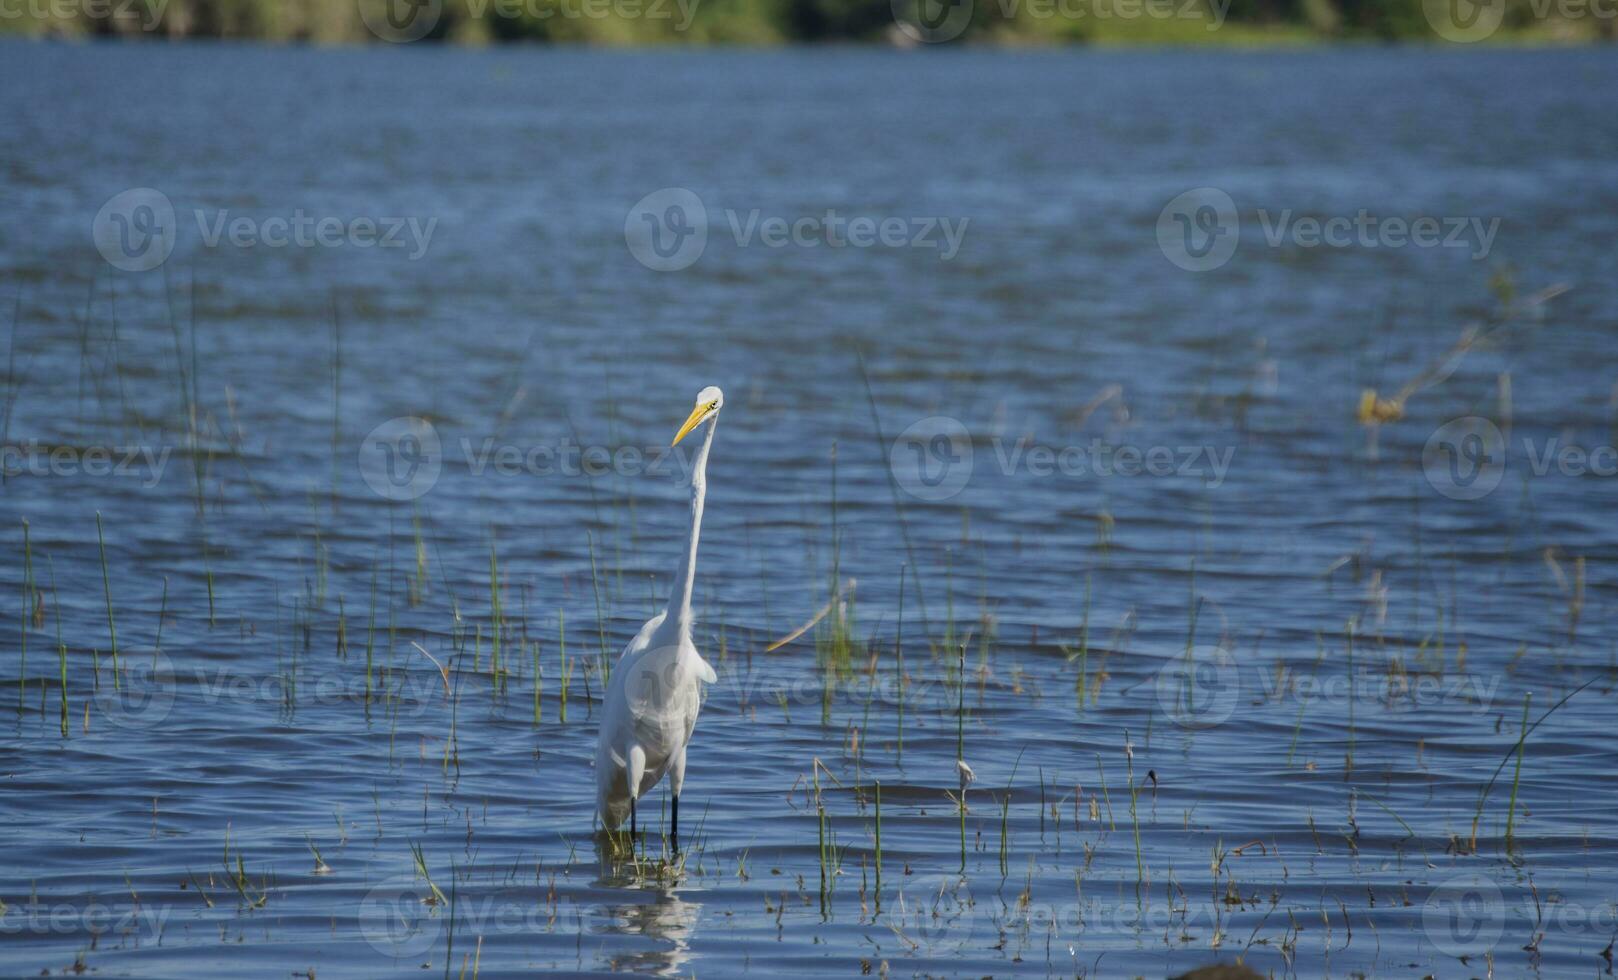 A white heron in the water fishing, close-up of a heron in the water, a white heron in the water searching for fish, hunting bird photo